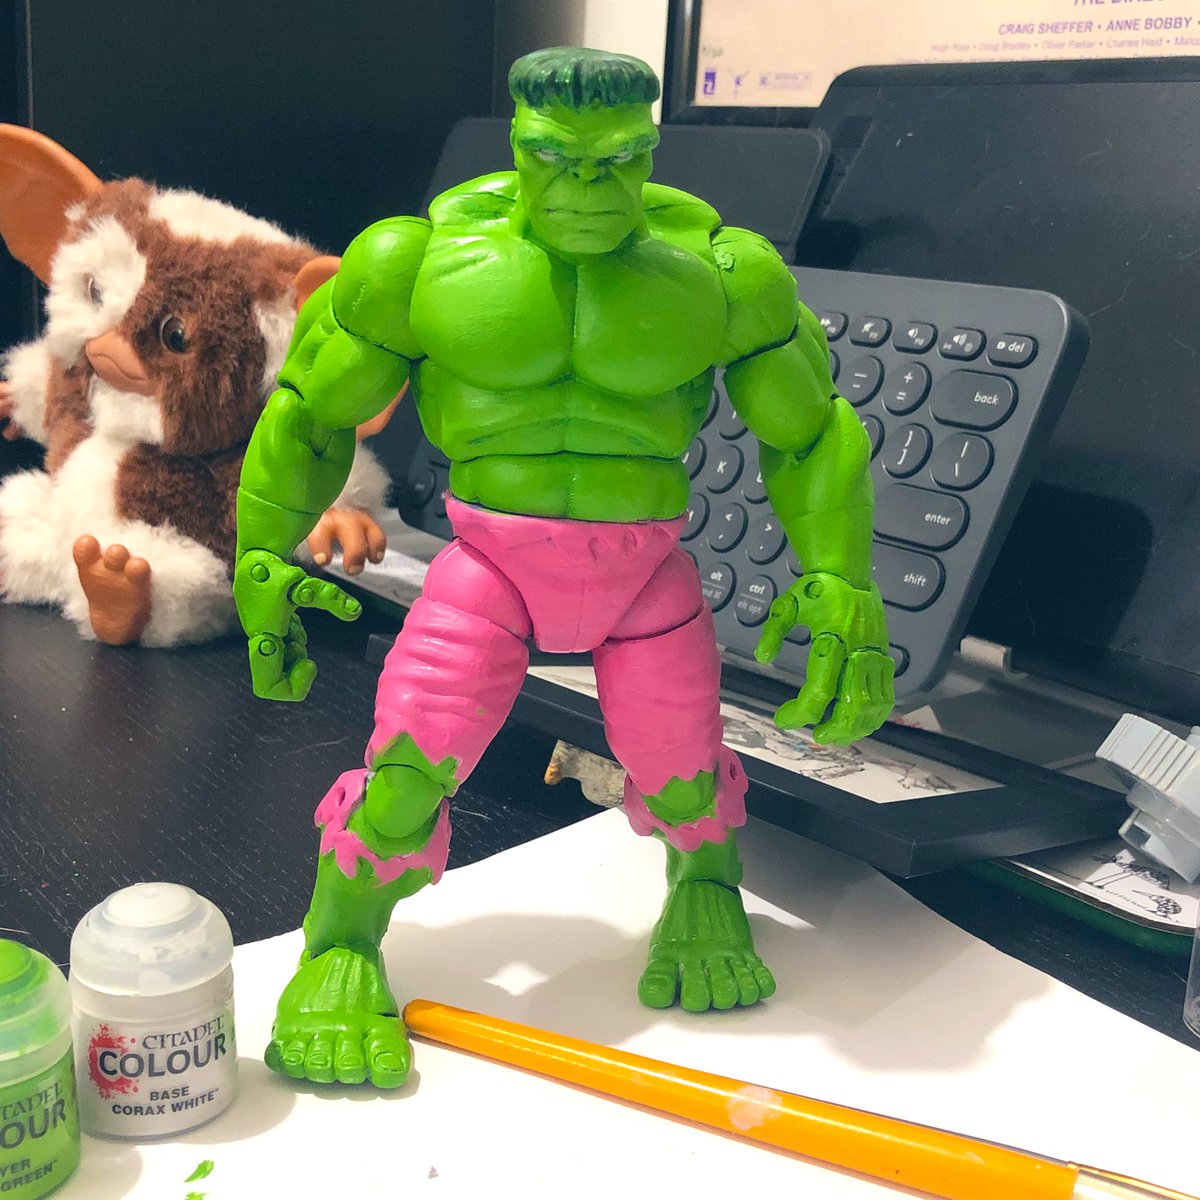 Winding down for the night.
Aside from a few touchups … he’s almost there.
#ImmortalHulk #Marvel #figure #customizedfigure